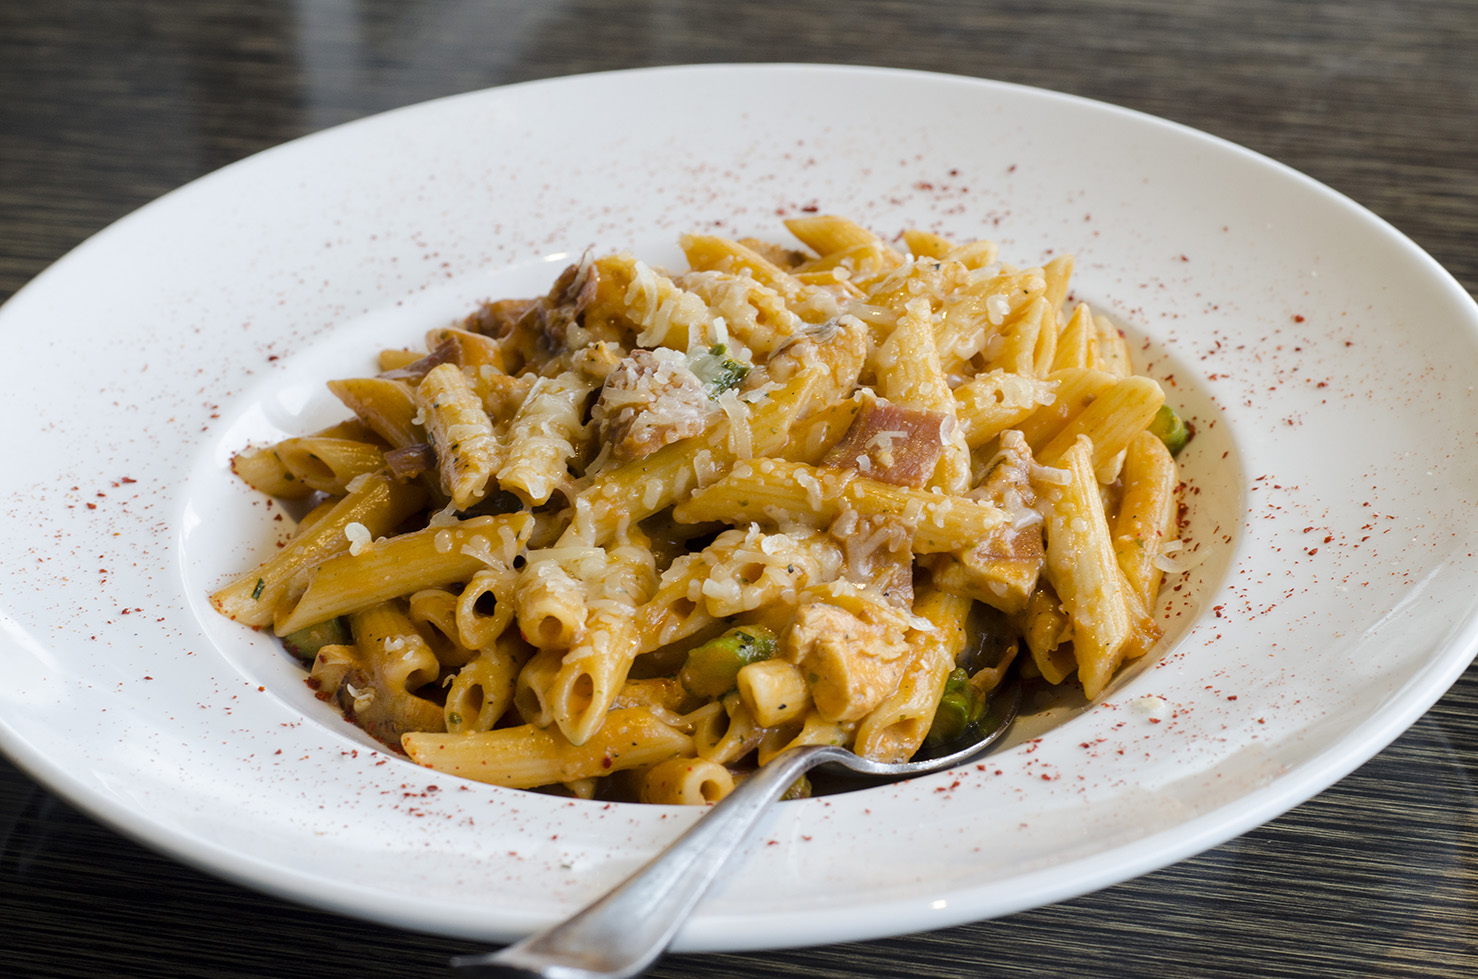 A plate of pasta at Mezzo is always a good choice.